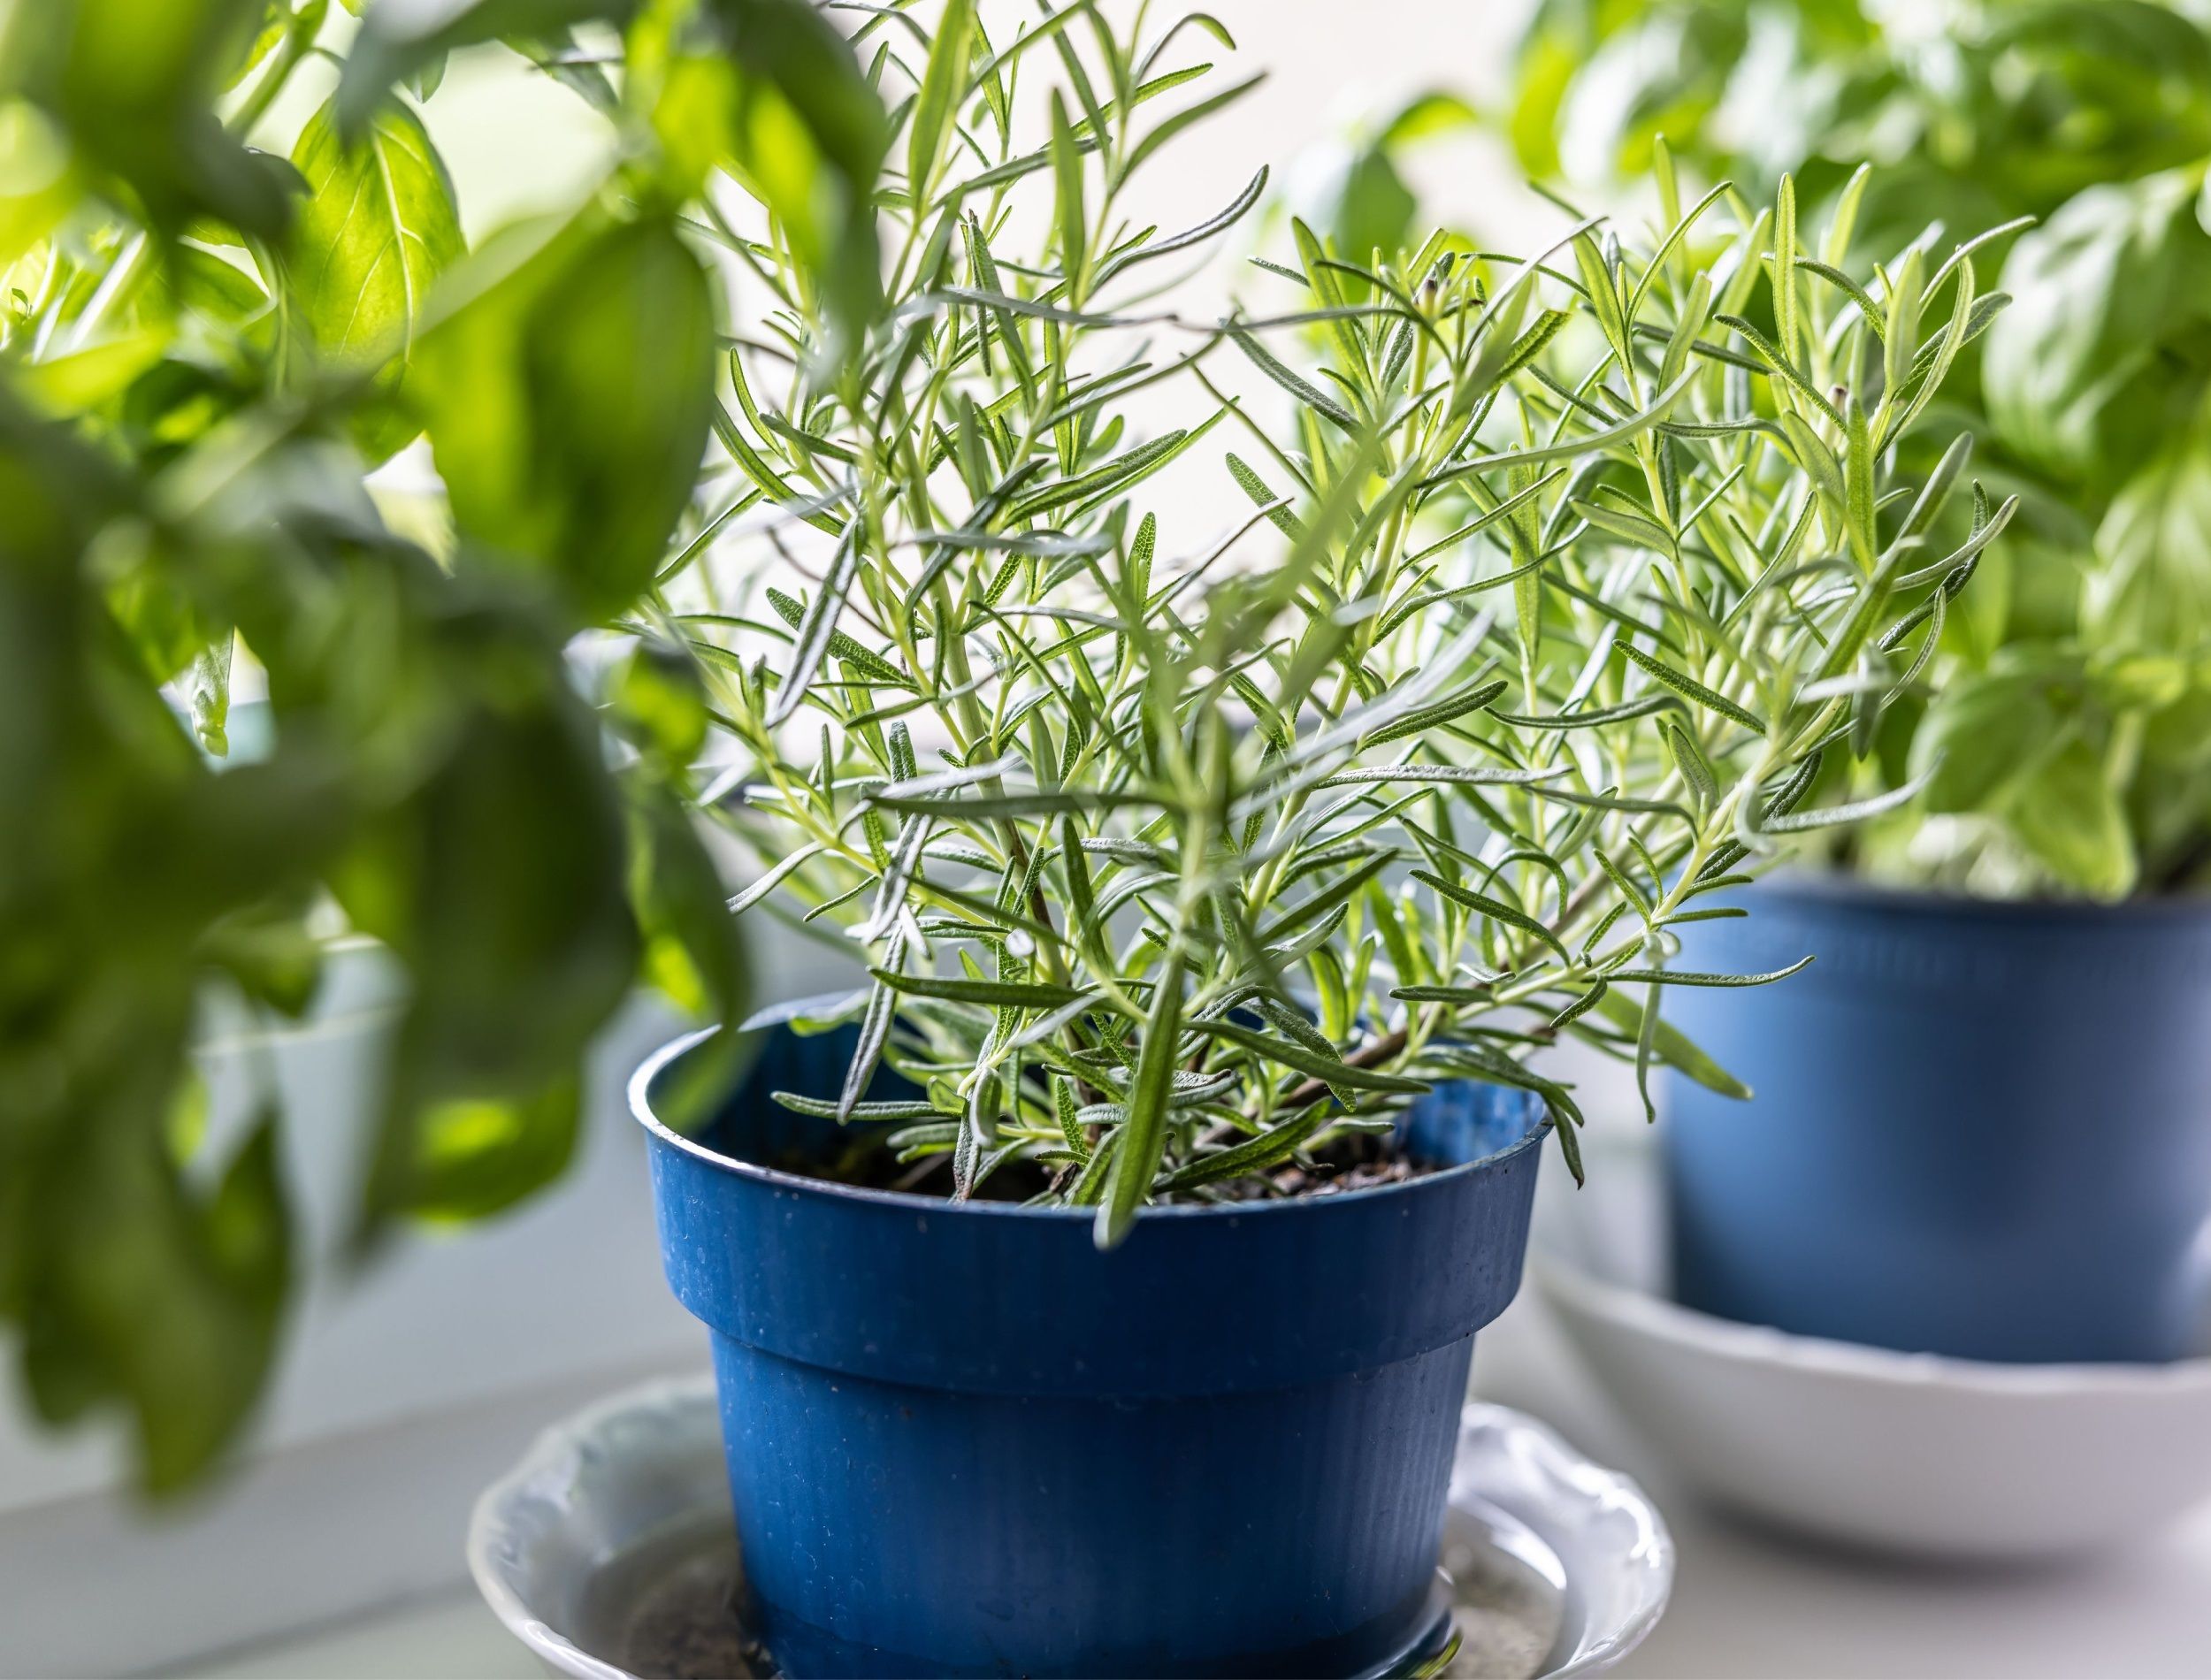 Fresh green herbs, rosemary and basil, in blue pots placed on a window frame.